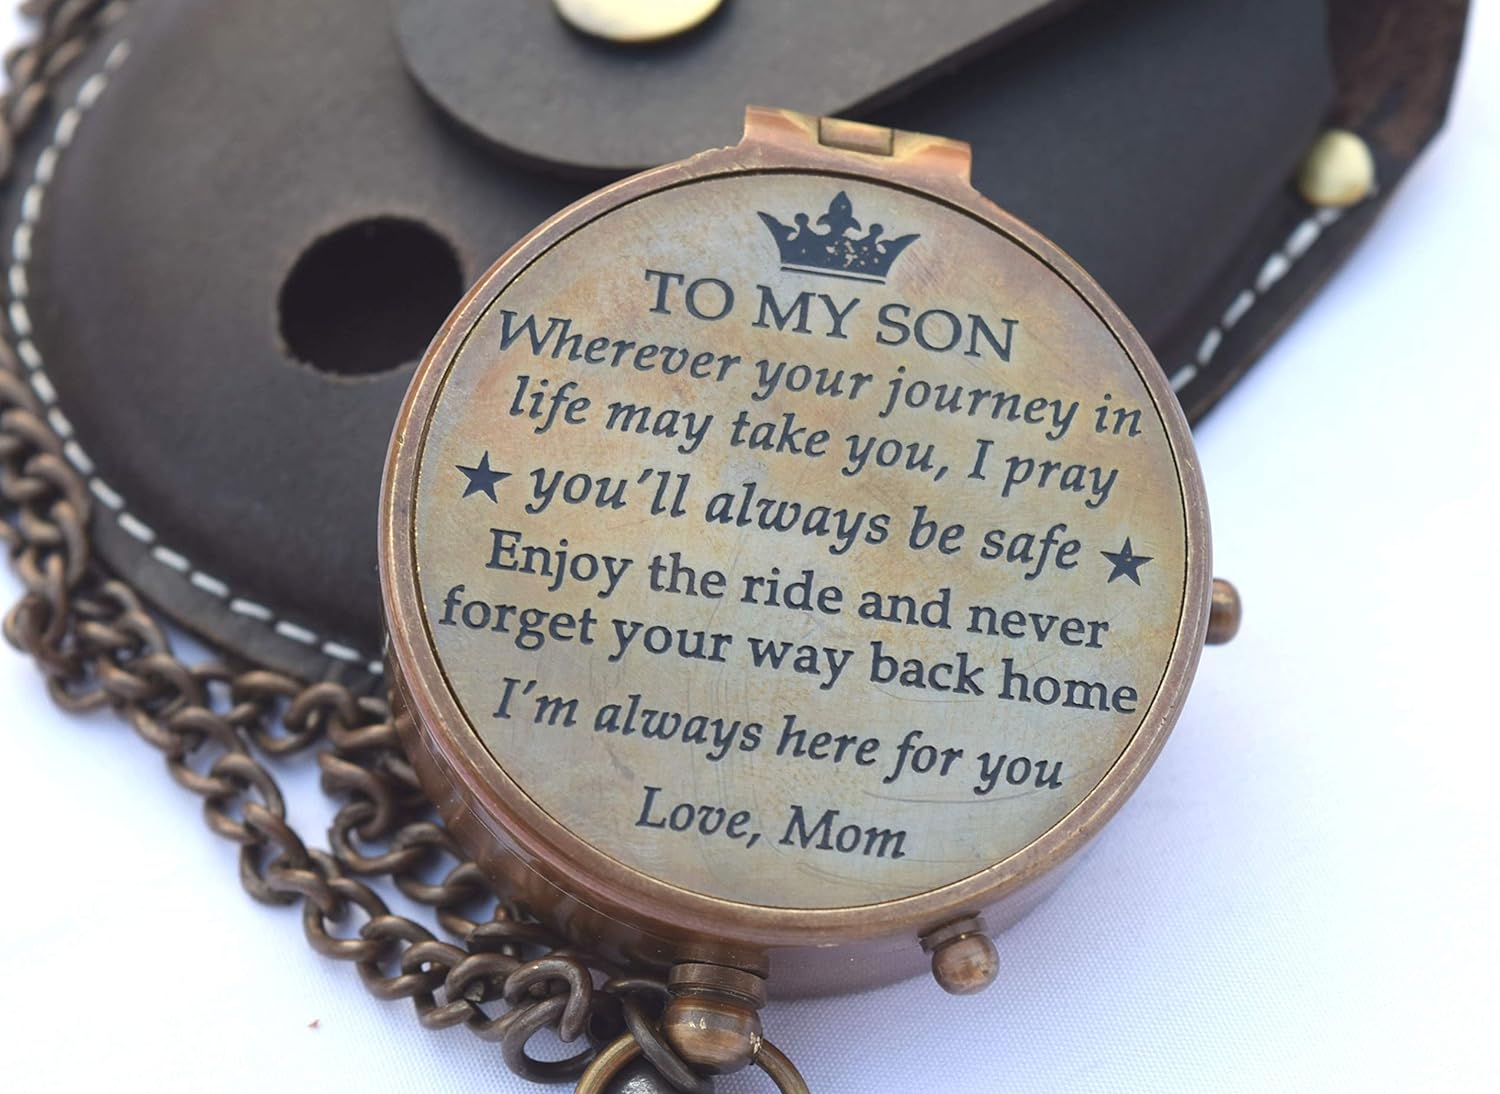 Mom to Son Compass  to My Son Love Mom  Mother to Son Gifts - Graduation Day Gifts for Son - Son Birthday Gifts - Confirmation Gifts for Son